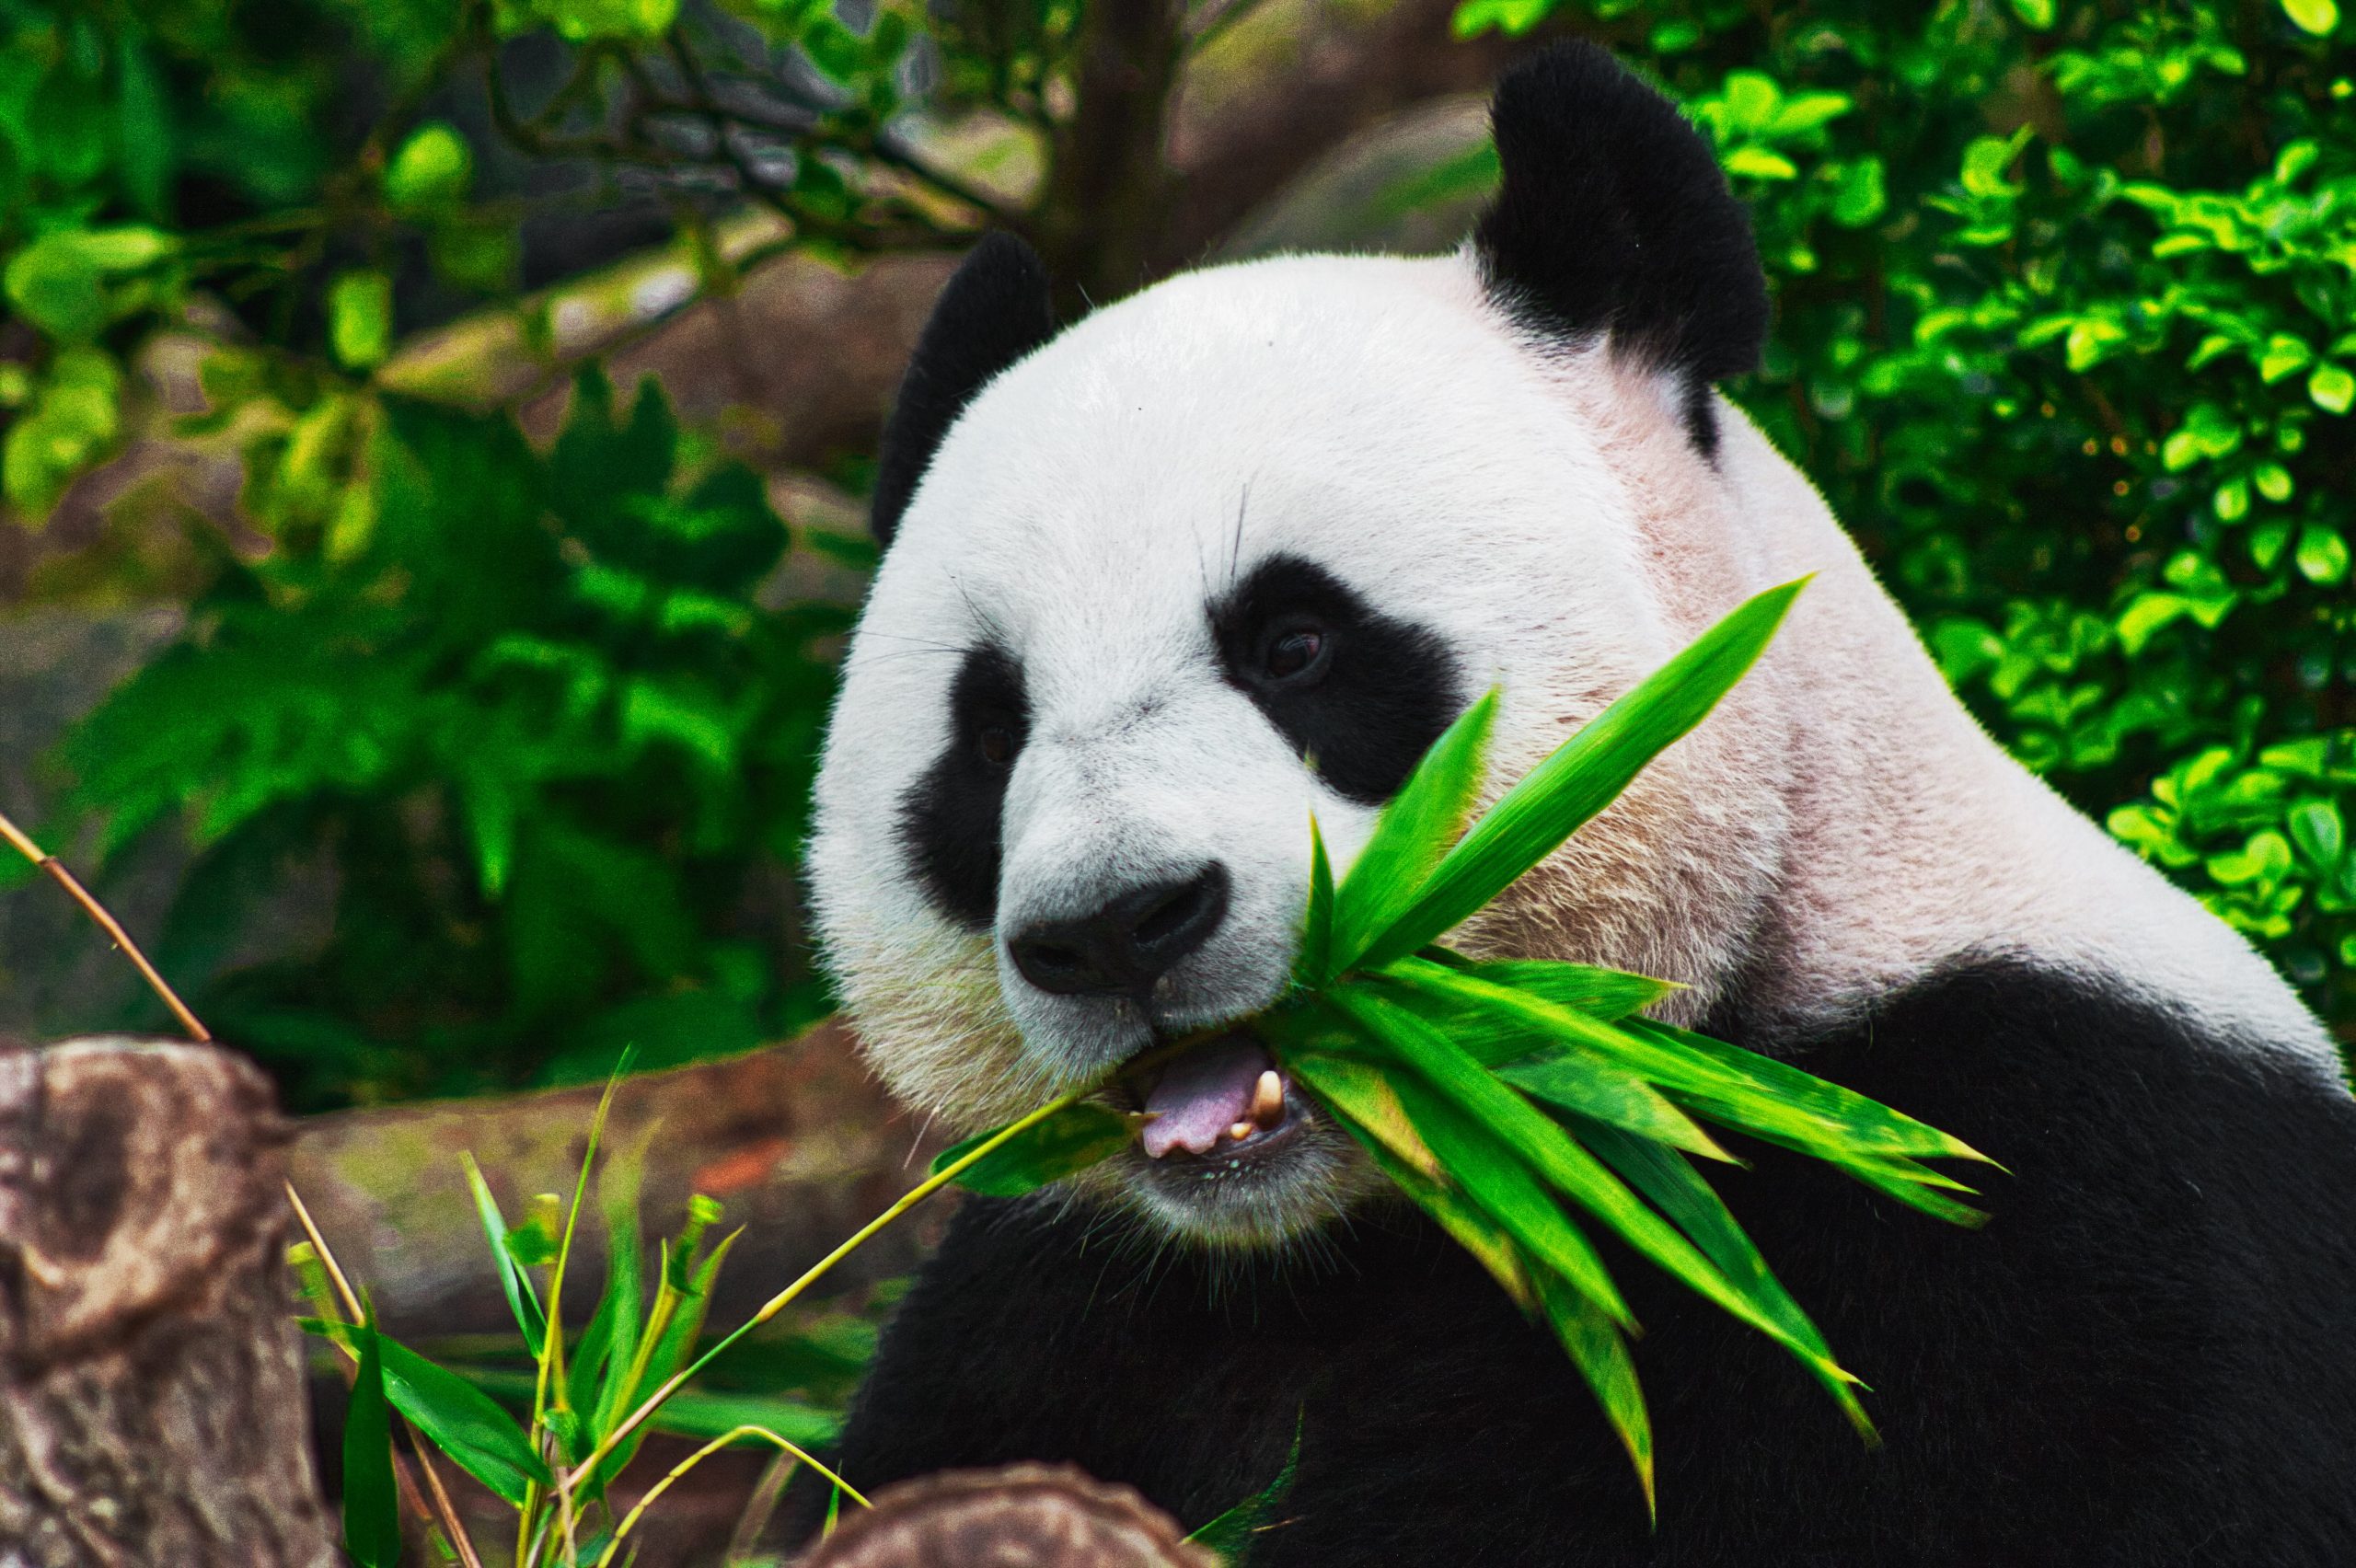 China claims that giant pandas are now safe from extinction thanks to its conservation efforts